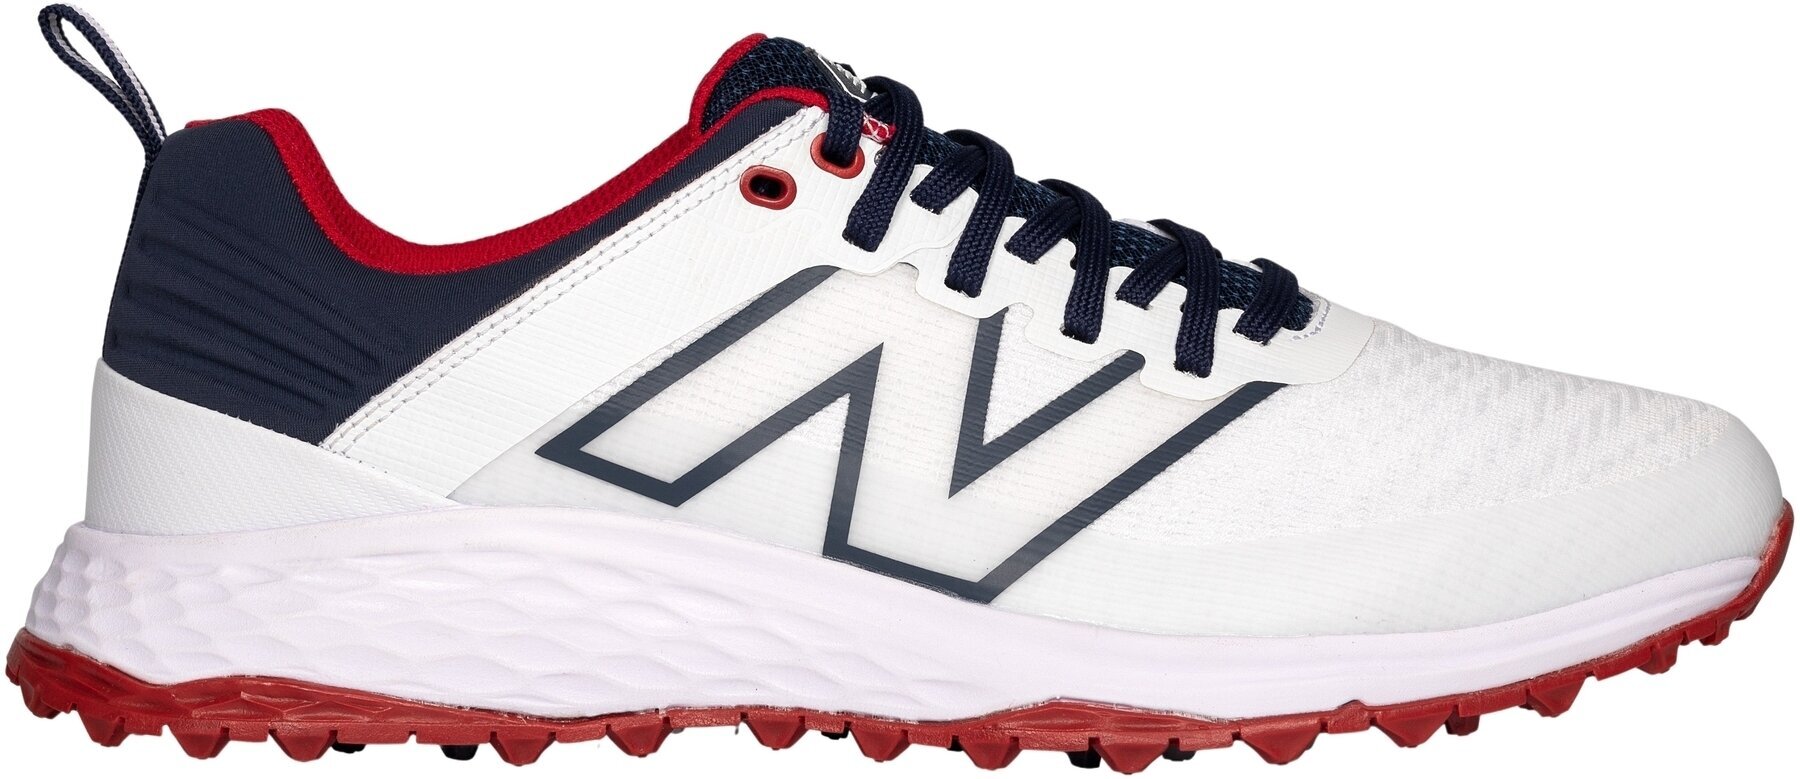 Men's golf shoes New Balance Contend Mens Golf Shoes White/Navy 45,5